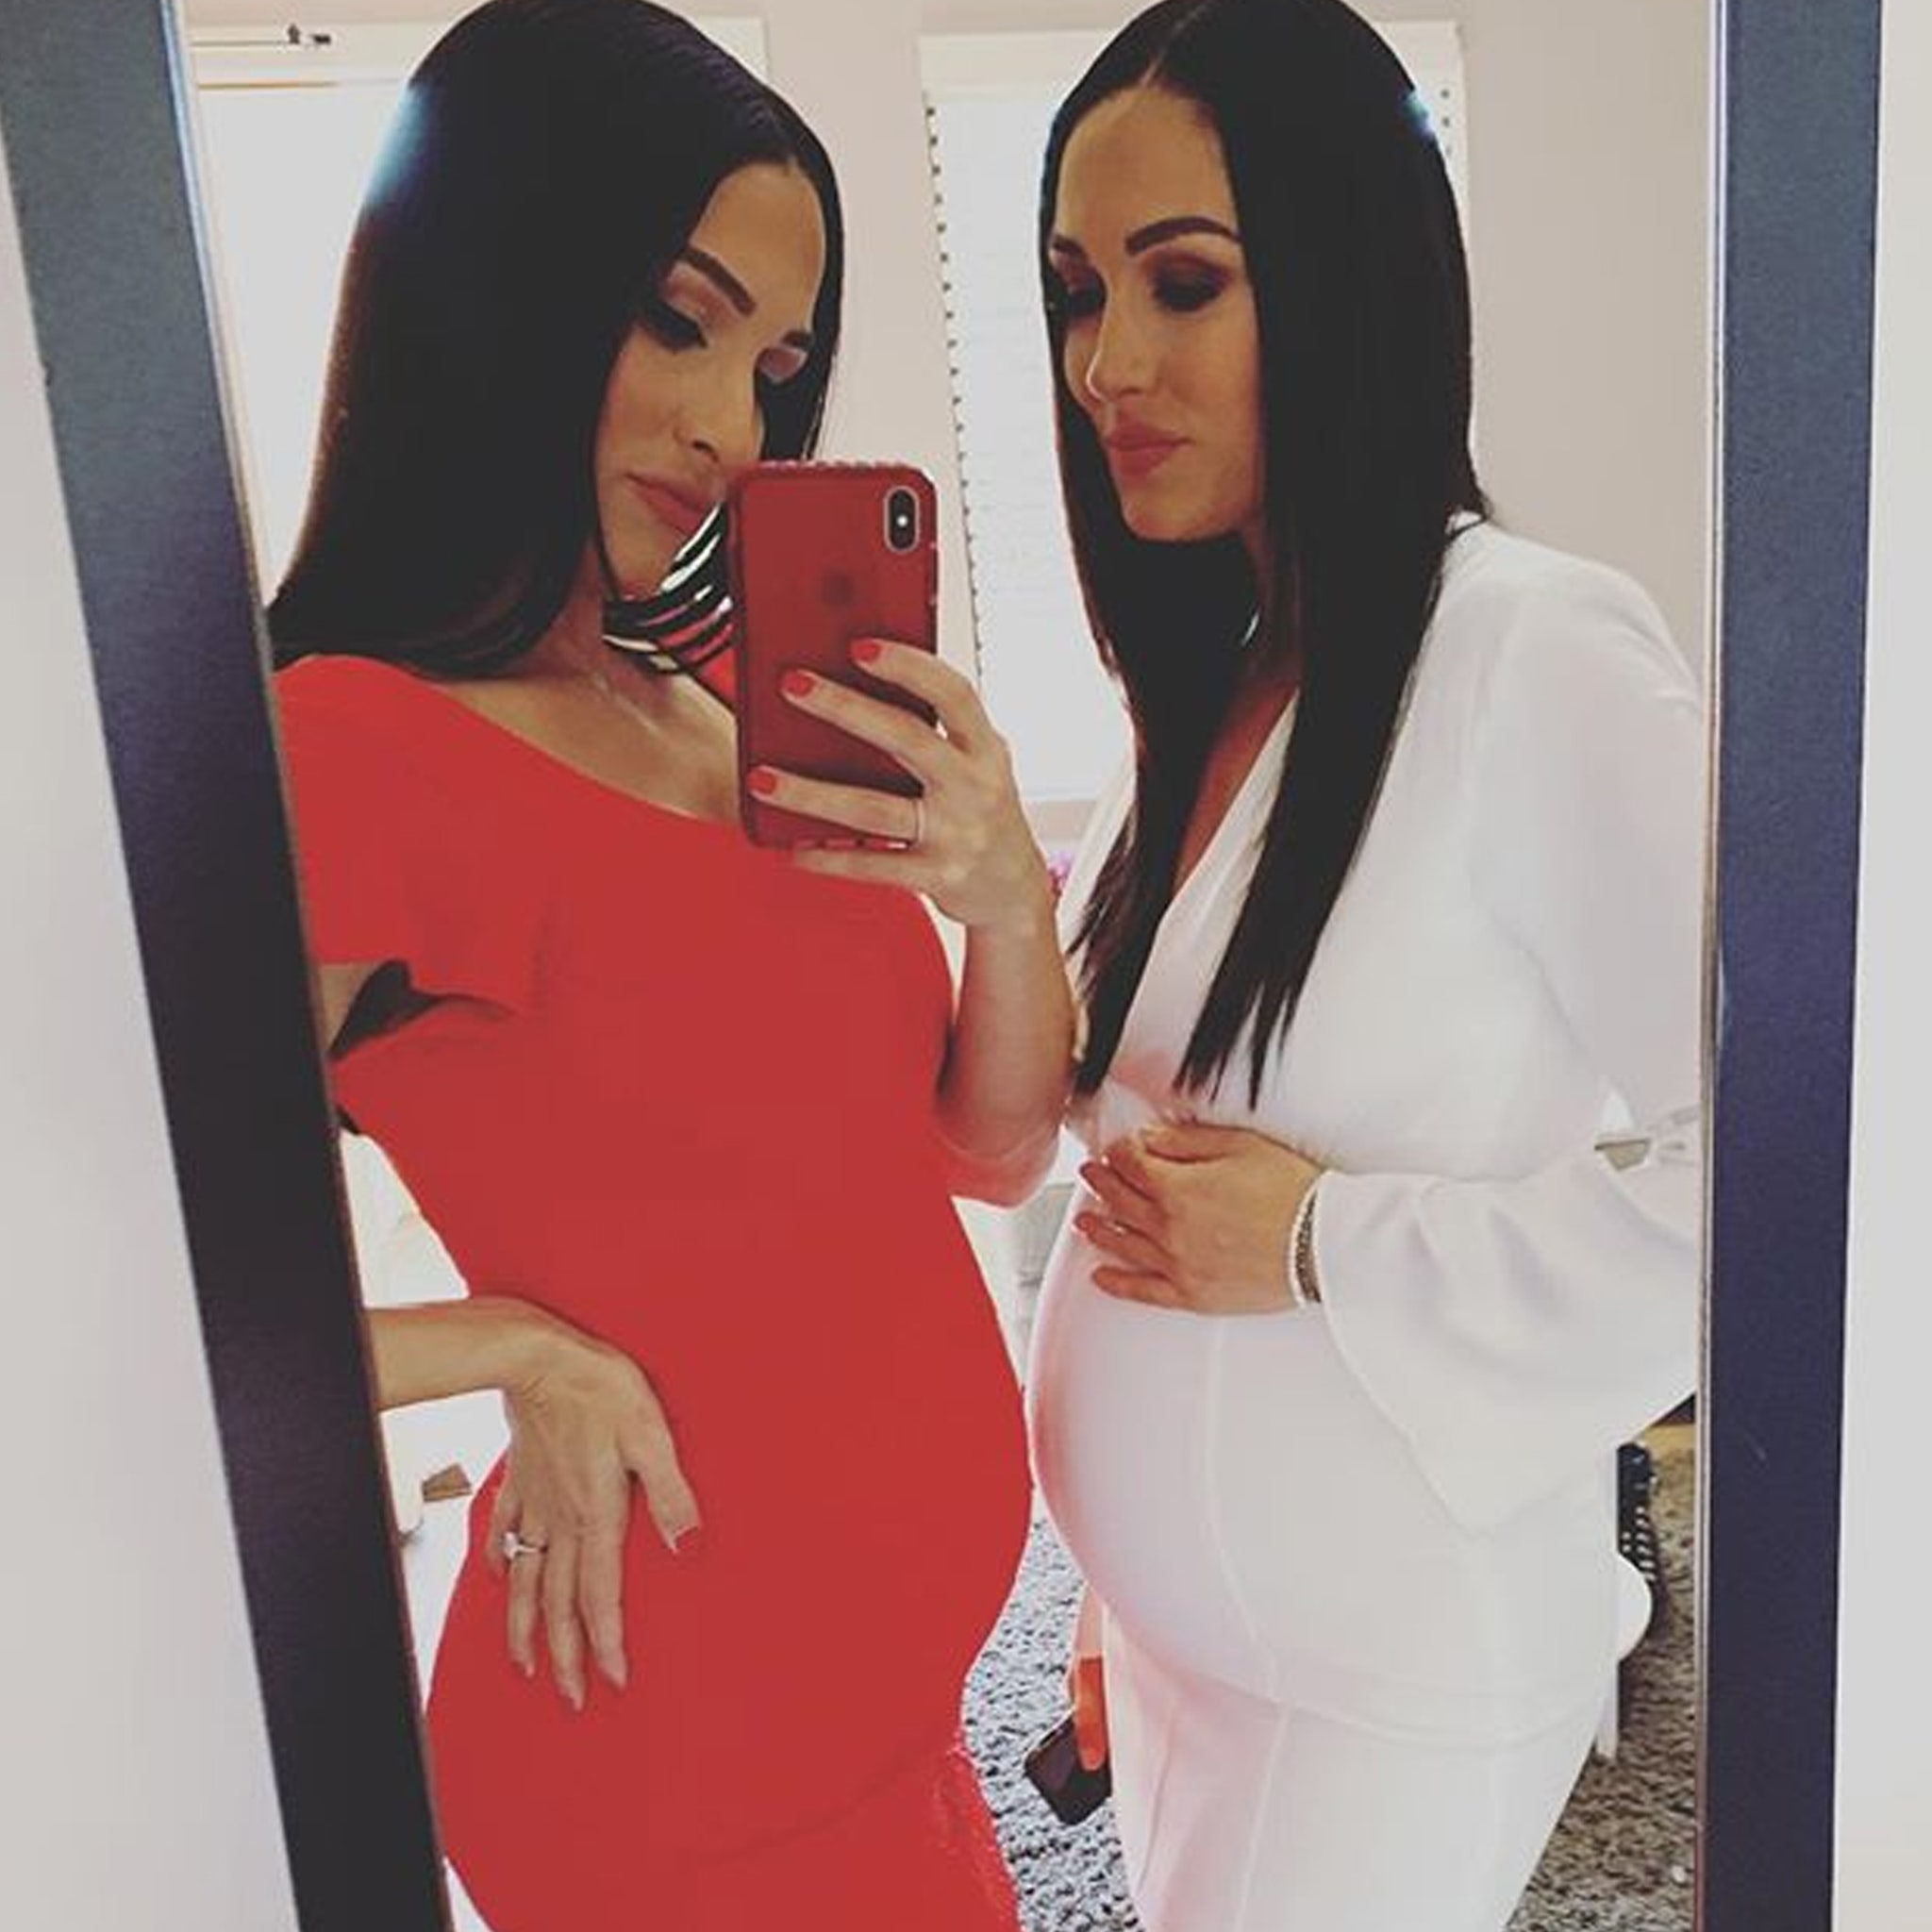 Brie And Nikki Bella Reveal They're Both Pregnant At The Same Time